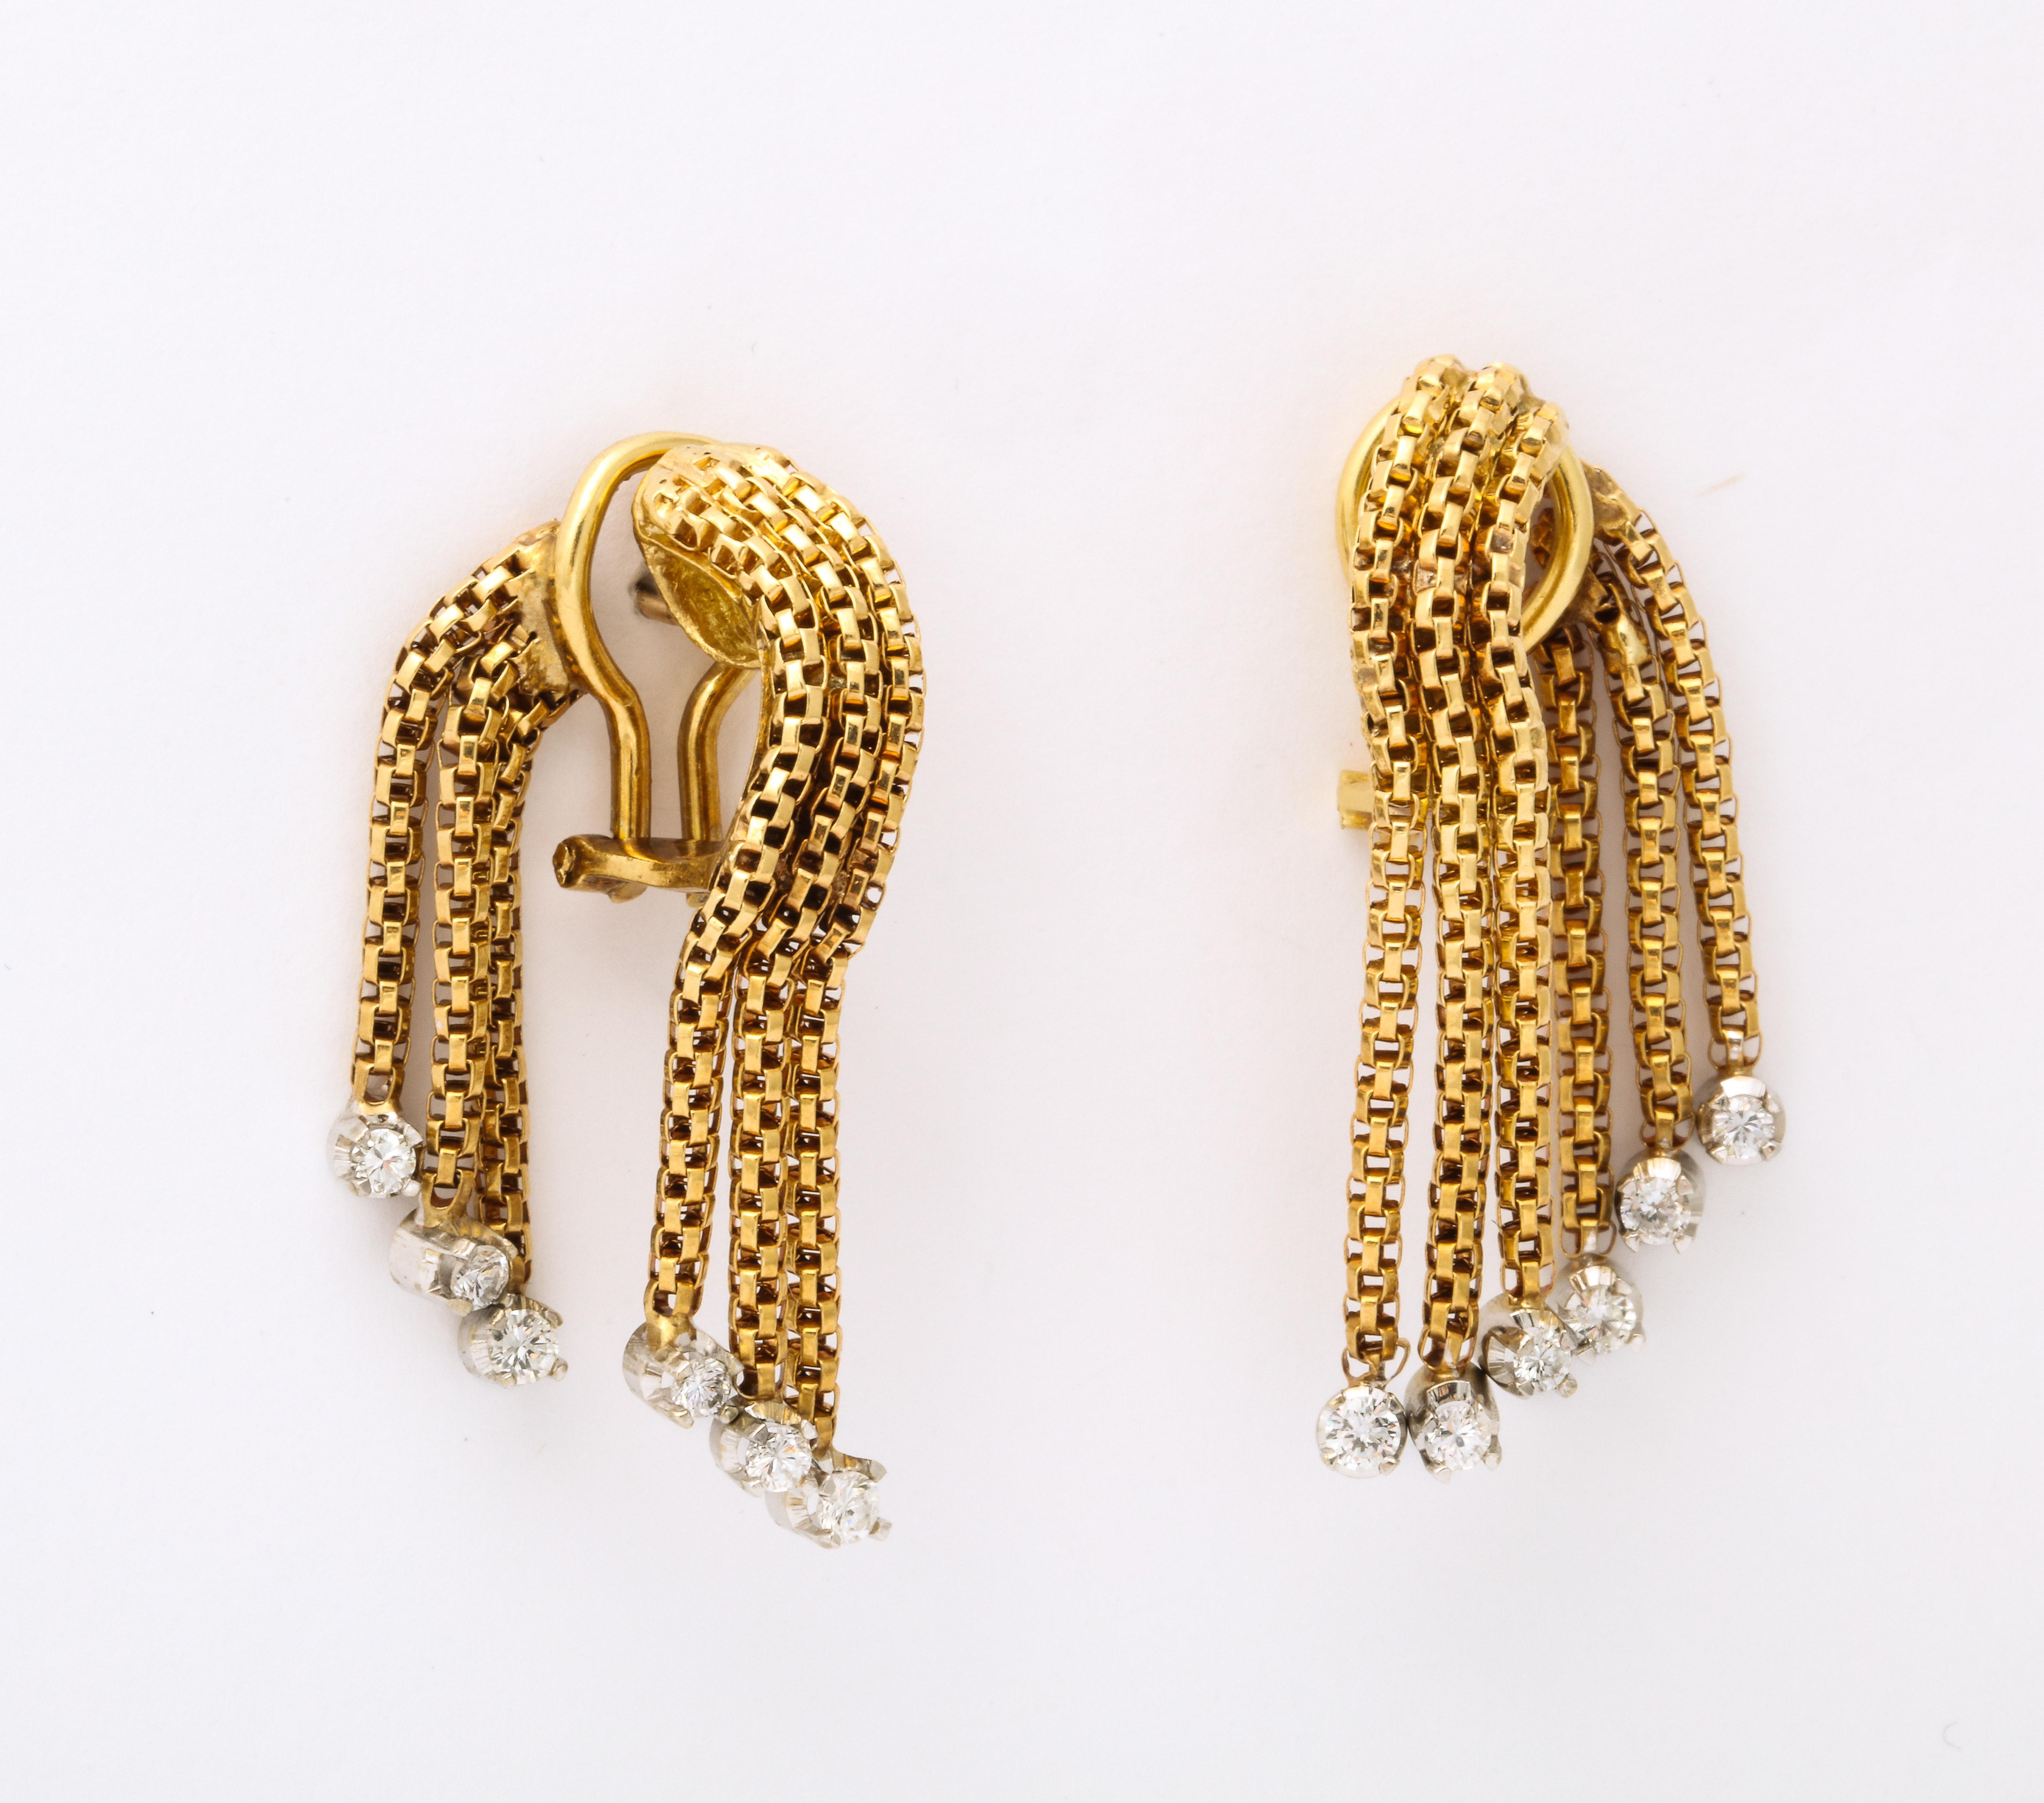 One Pair Of Ladies 18kt Yellow Gold Chain Link Design Flexible Earrings Set With Twelve Prong Set Diamonds Hanging From All Fringes. Crafted In The 1960's In Italy.